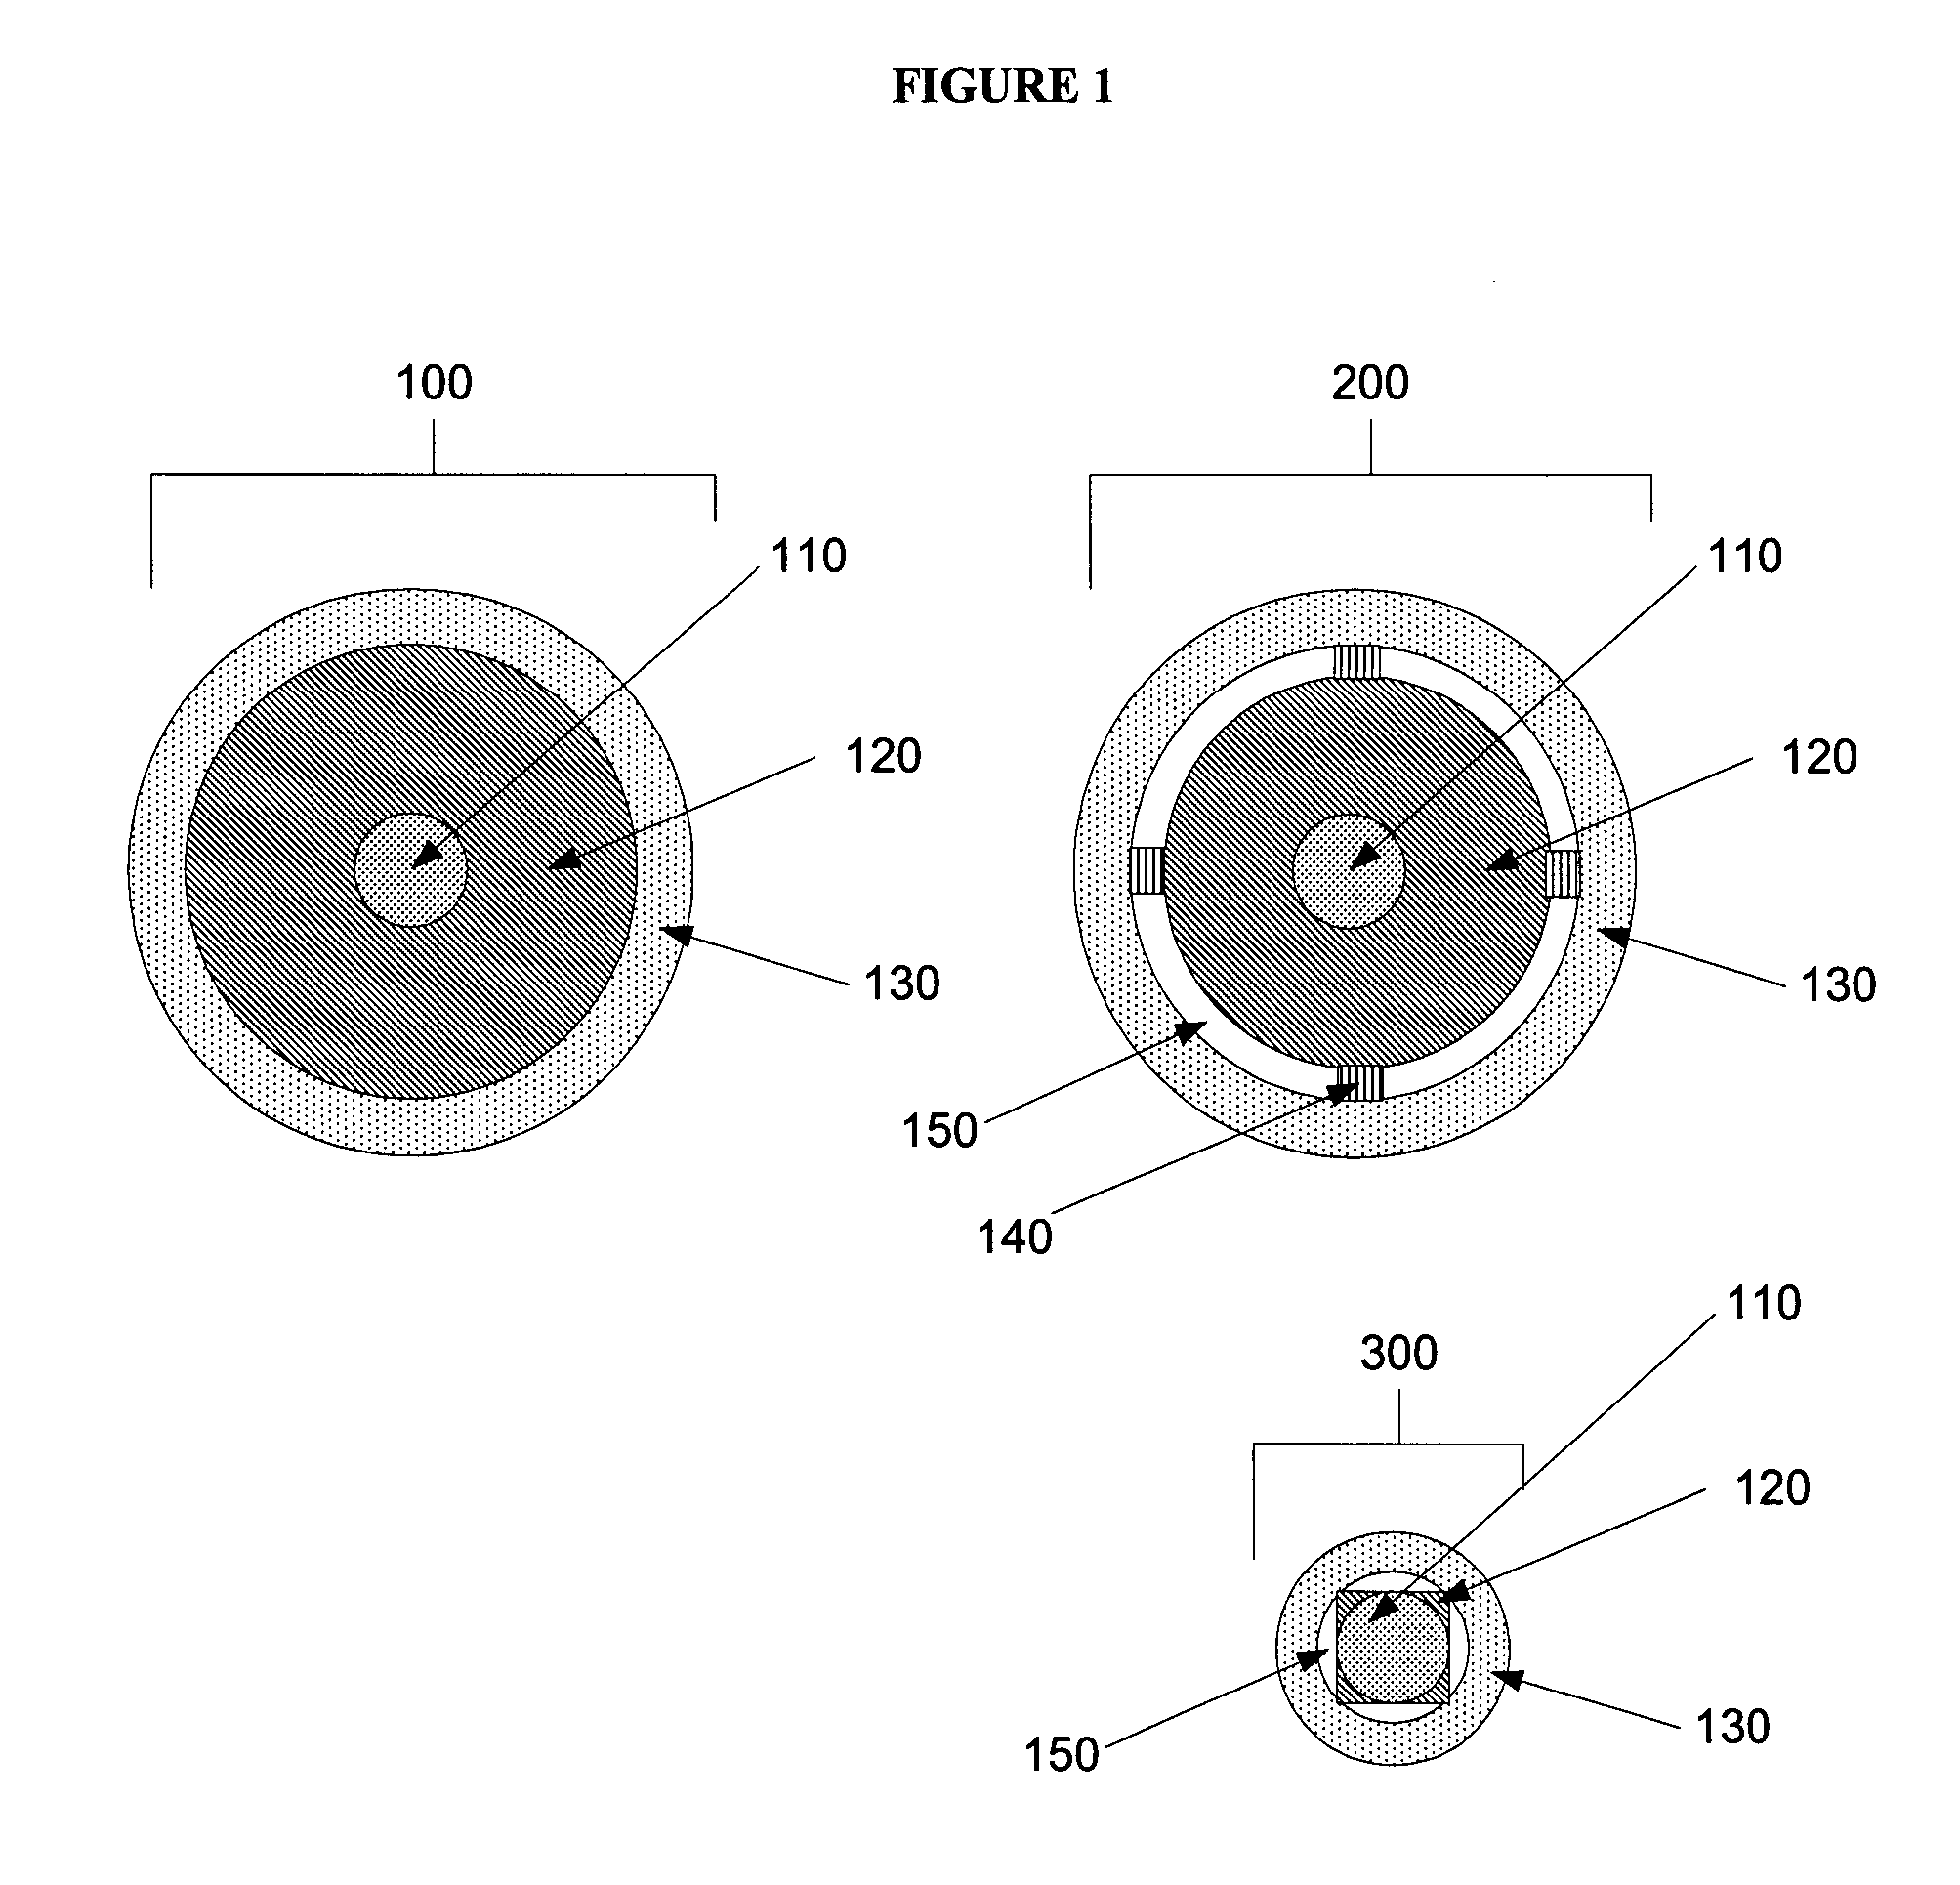 Transmission line with heat transfer ability